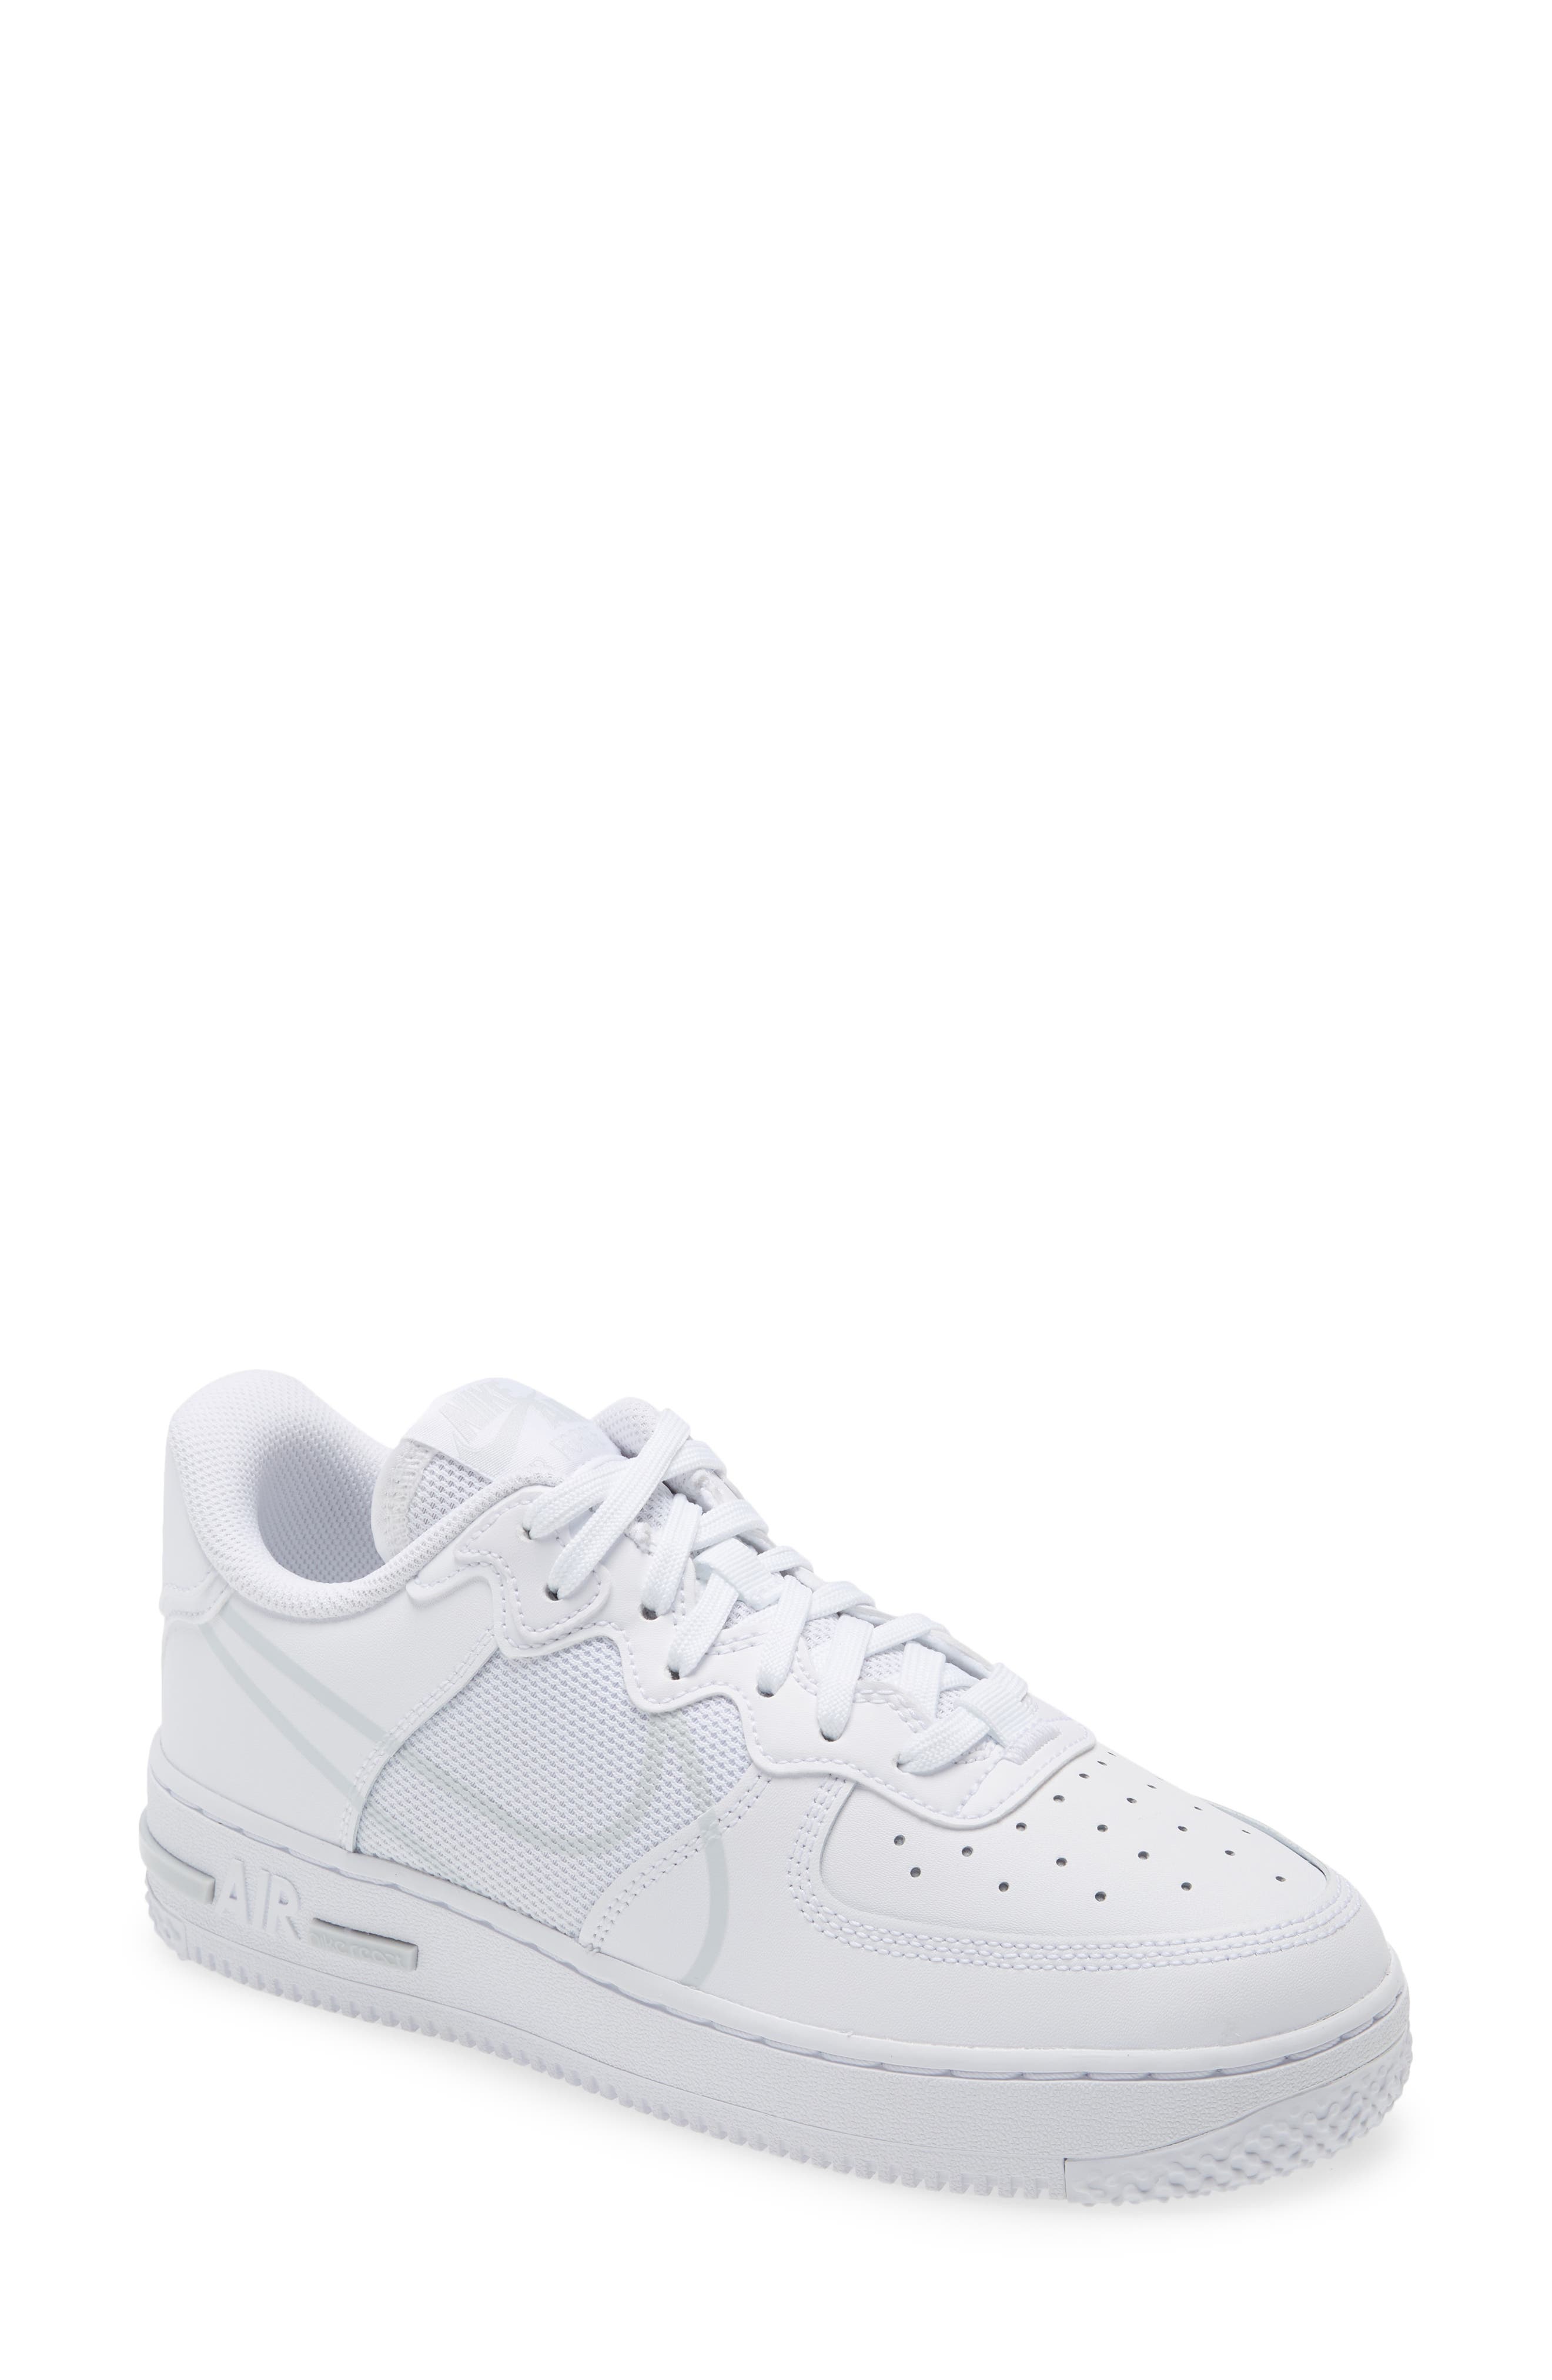 air force 1 white size 4.5